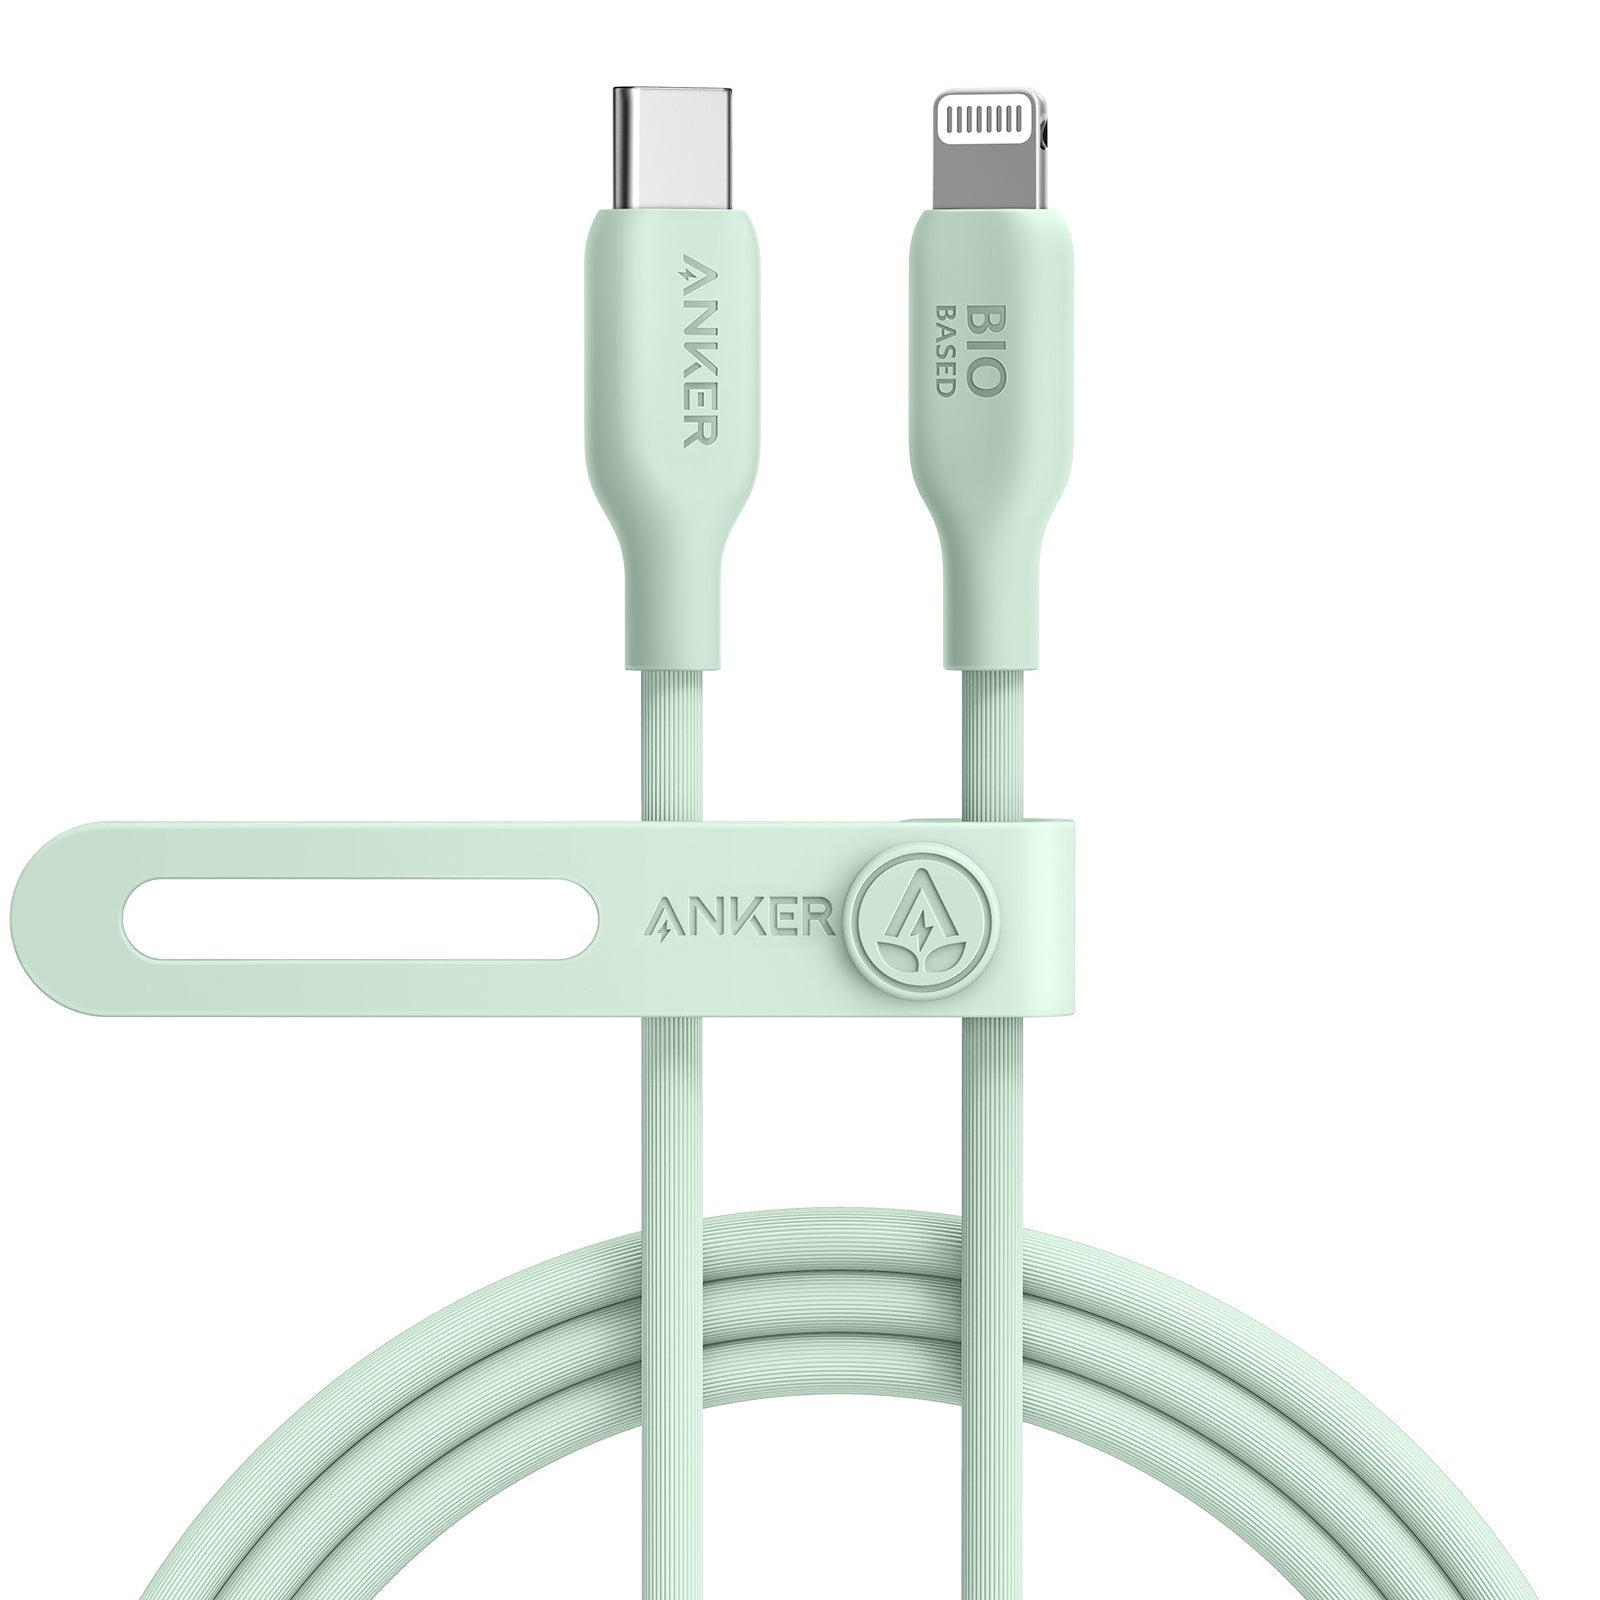 Anker 541 USB-C to Lightning 1.8m Charging Cable with 30W Charging Support (Eco Friendly) - Green